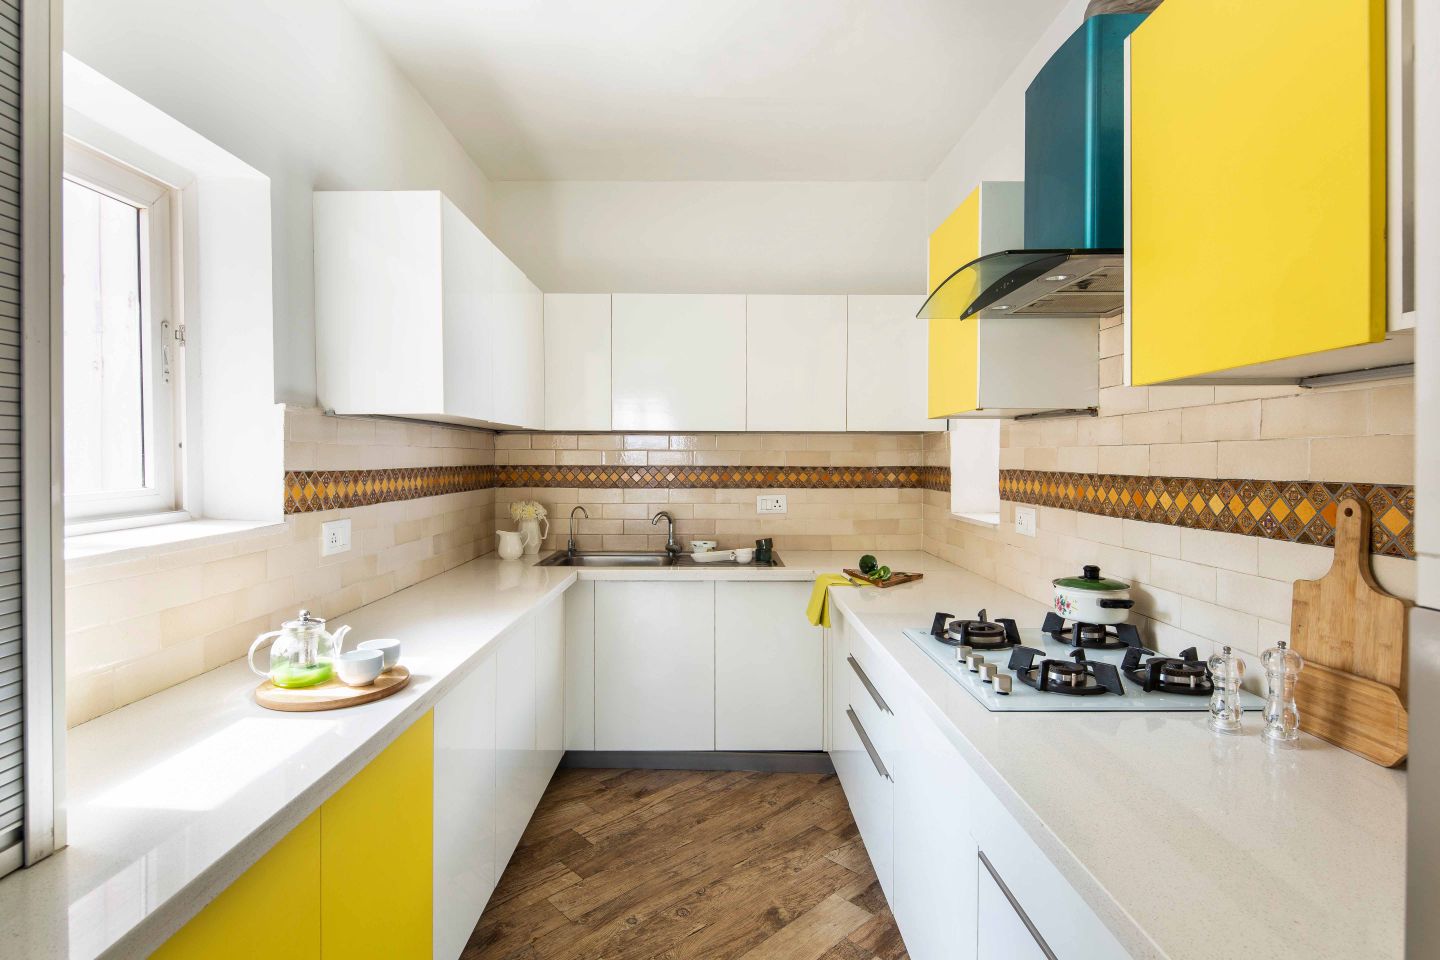 Modular U-Shaped Kitchen Design In Frosty White And Marigold Yellow - Livspace